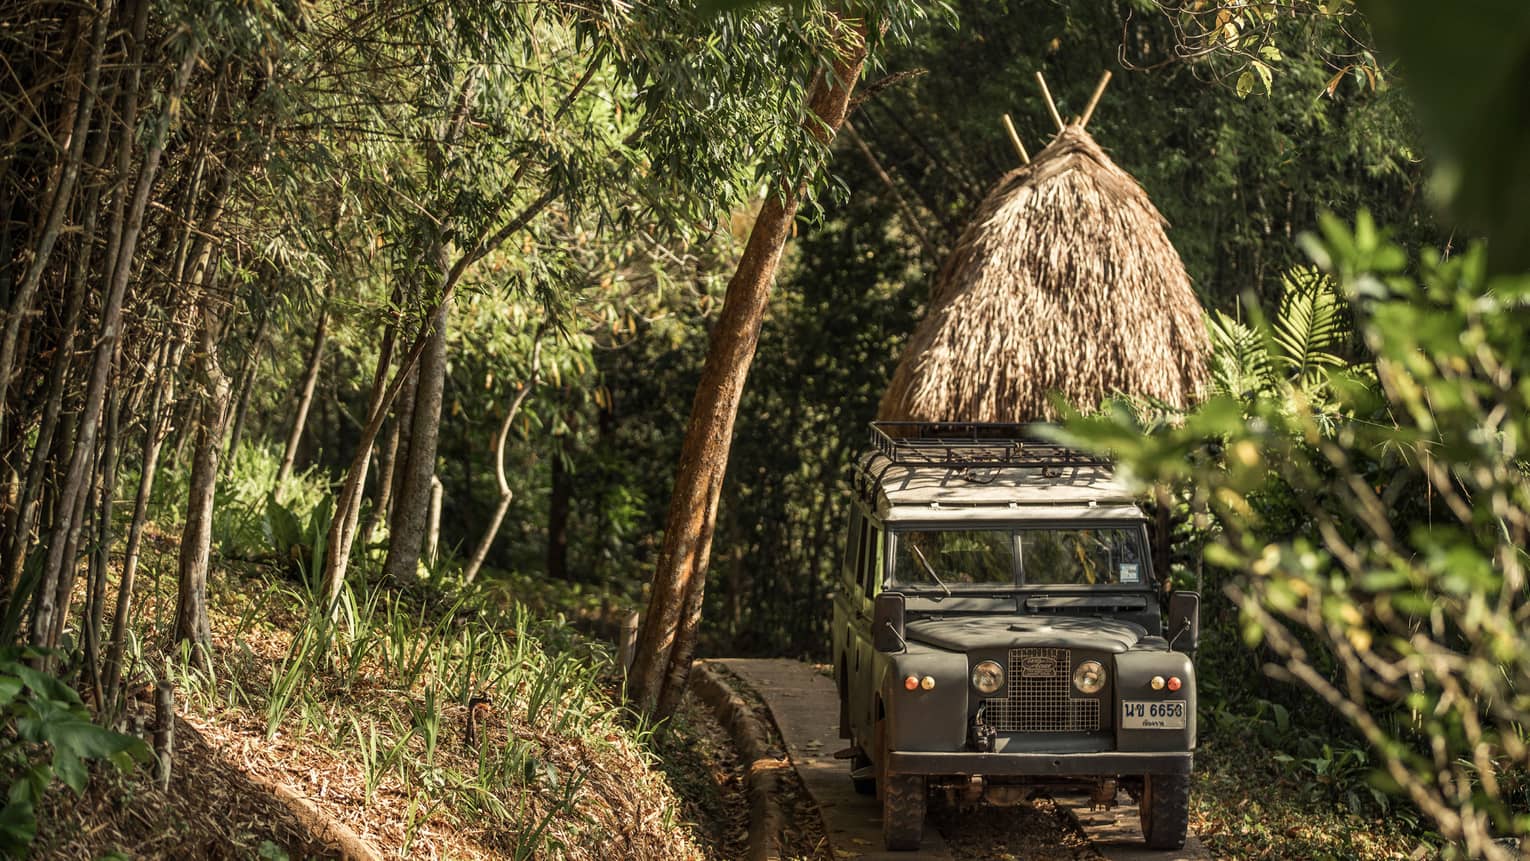 Jeep driving down path in forest past thatched-roof hut